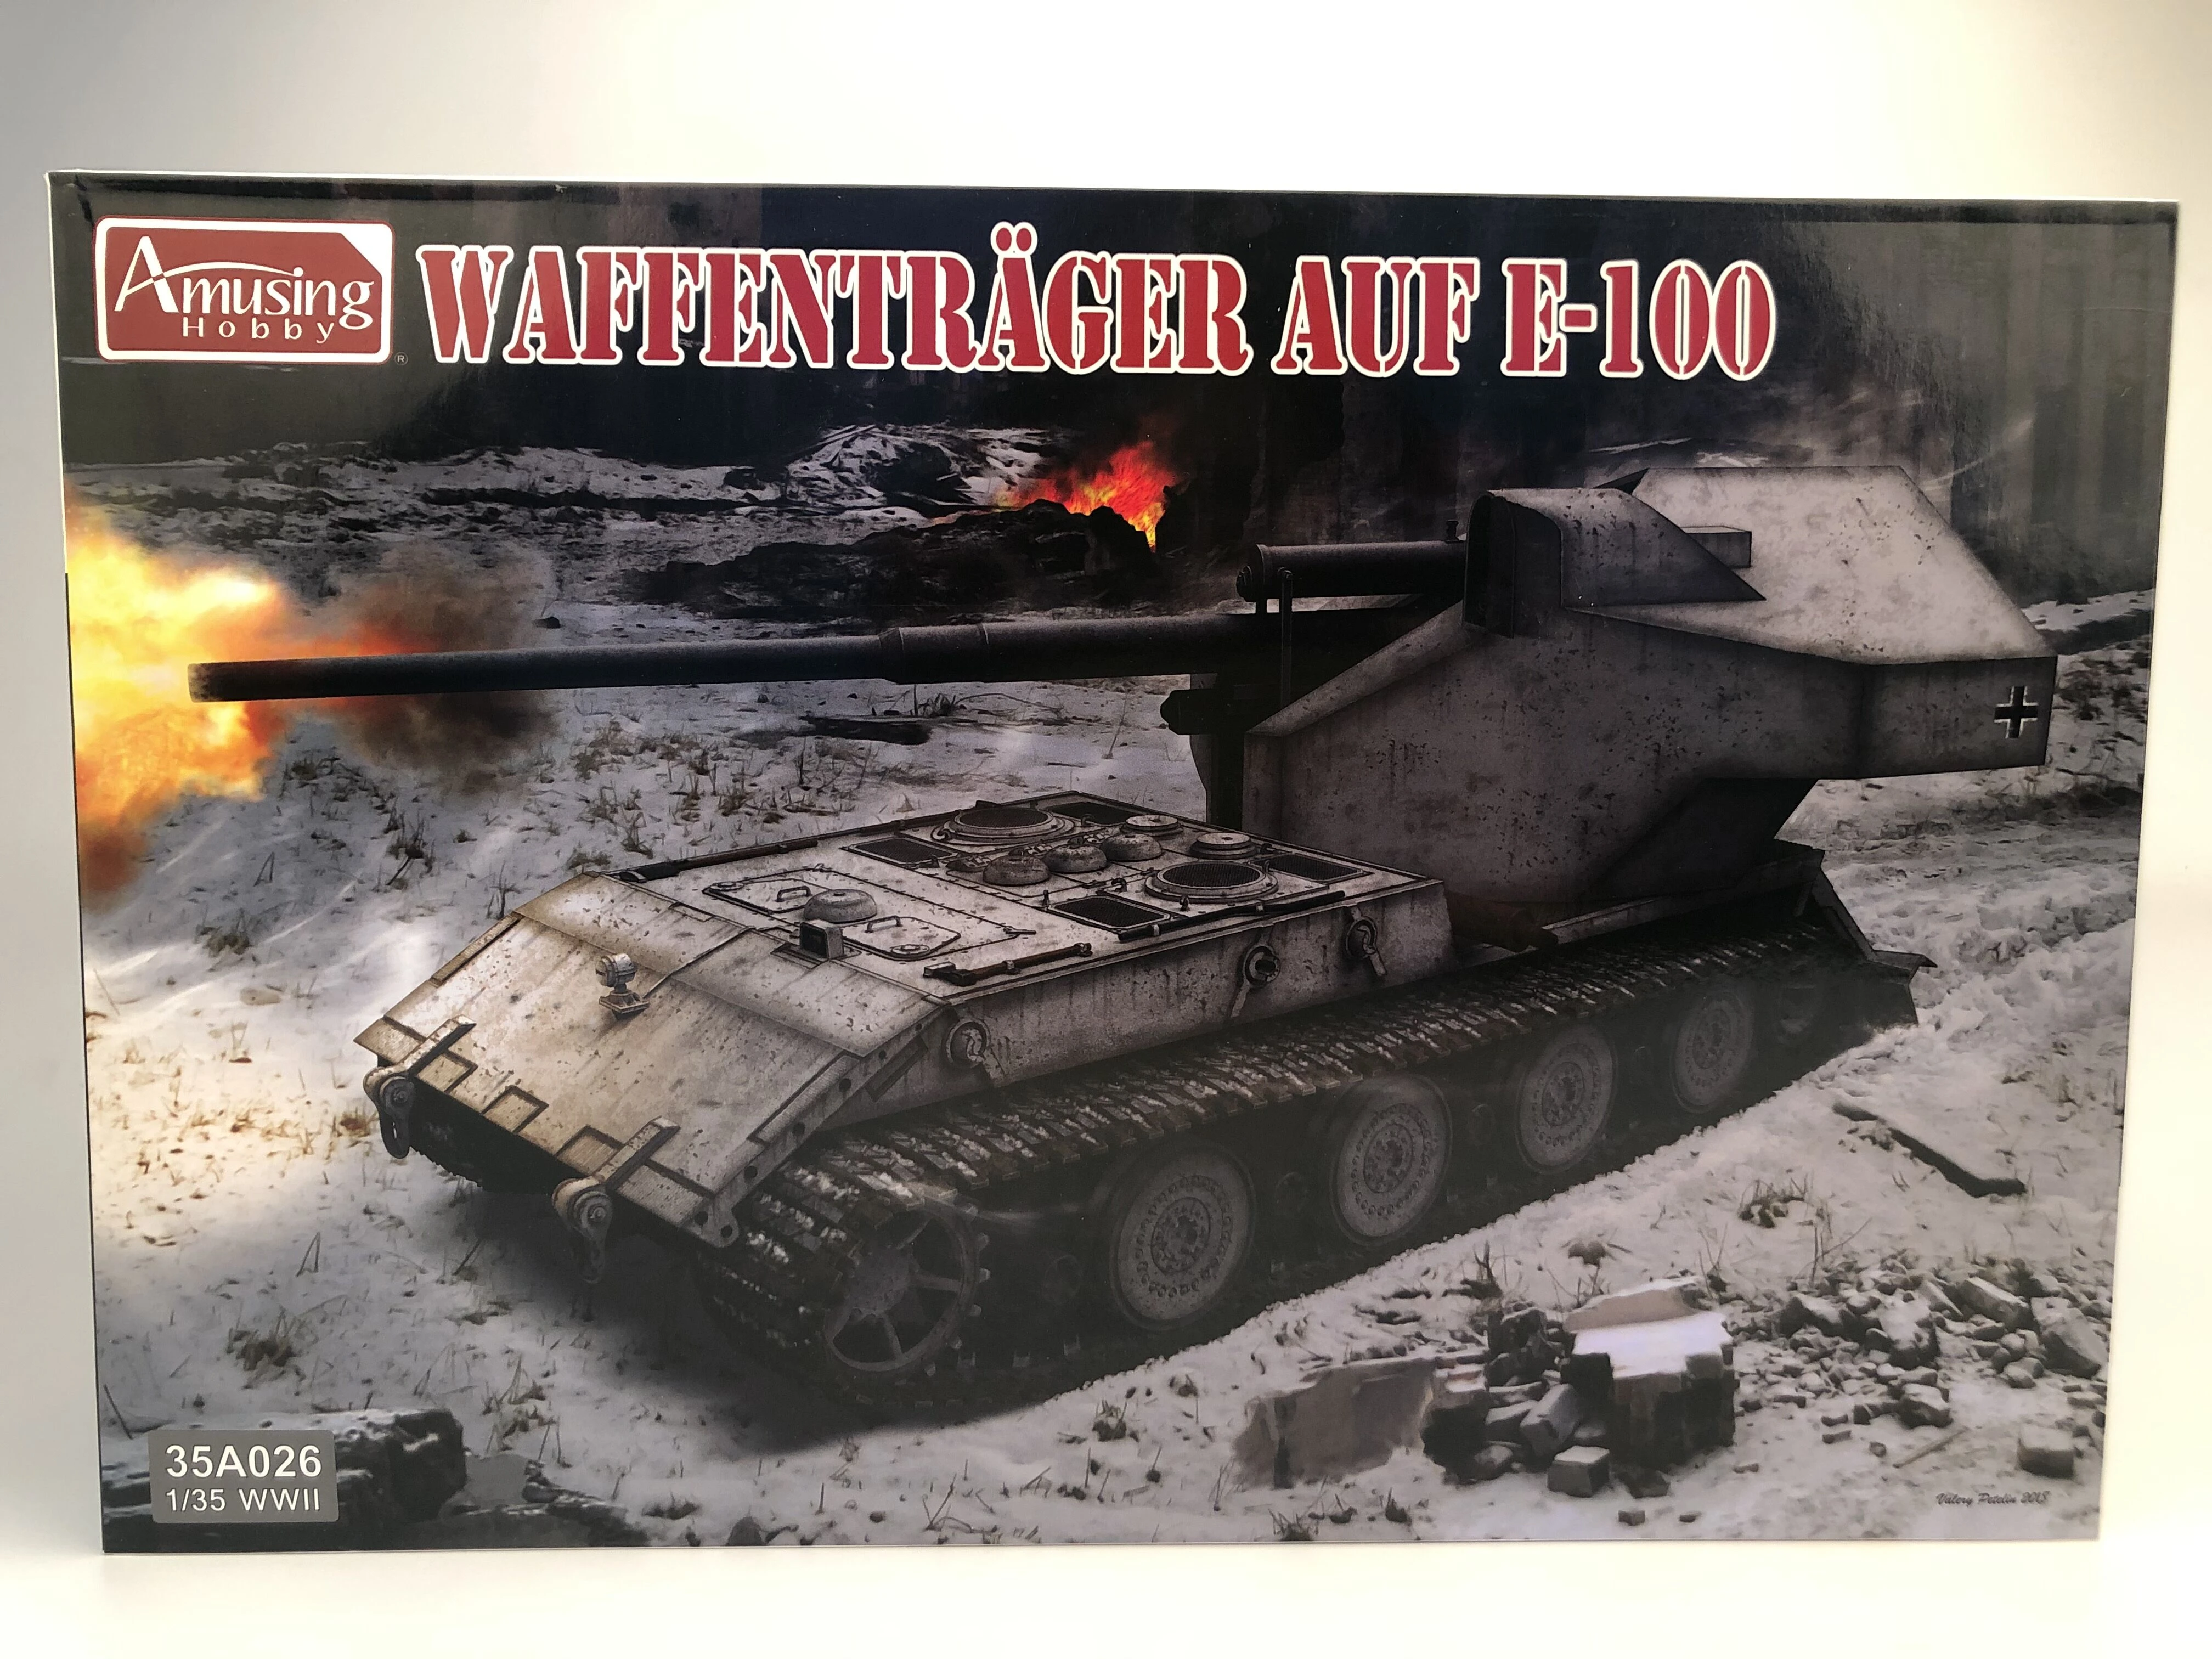 Amusing Hobby 35A026 1/35 German Waffentrager Auf E-100 for sale online 